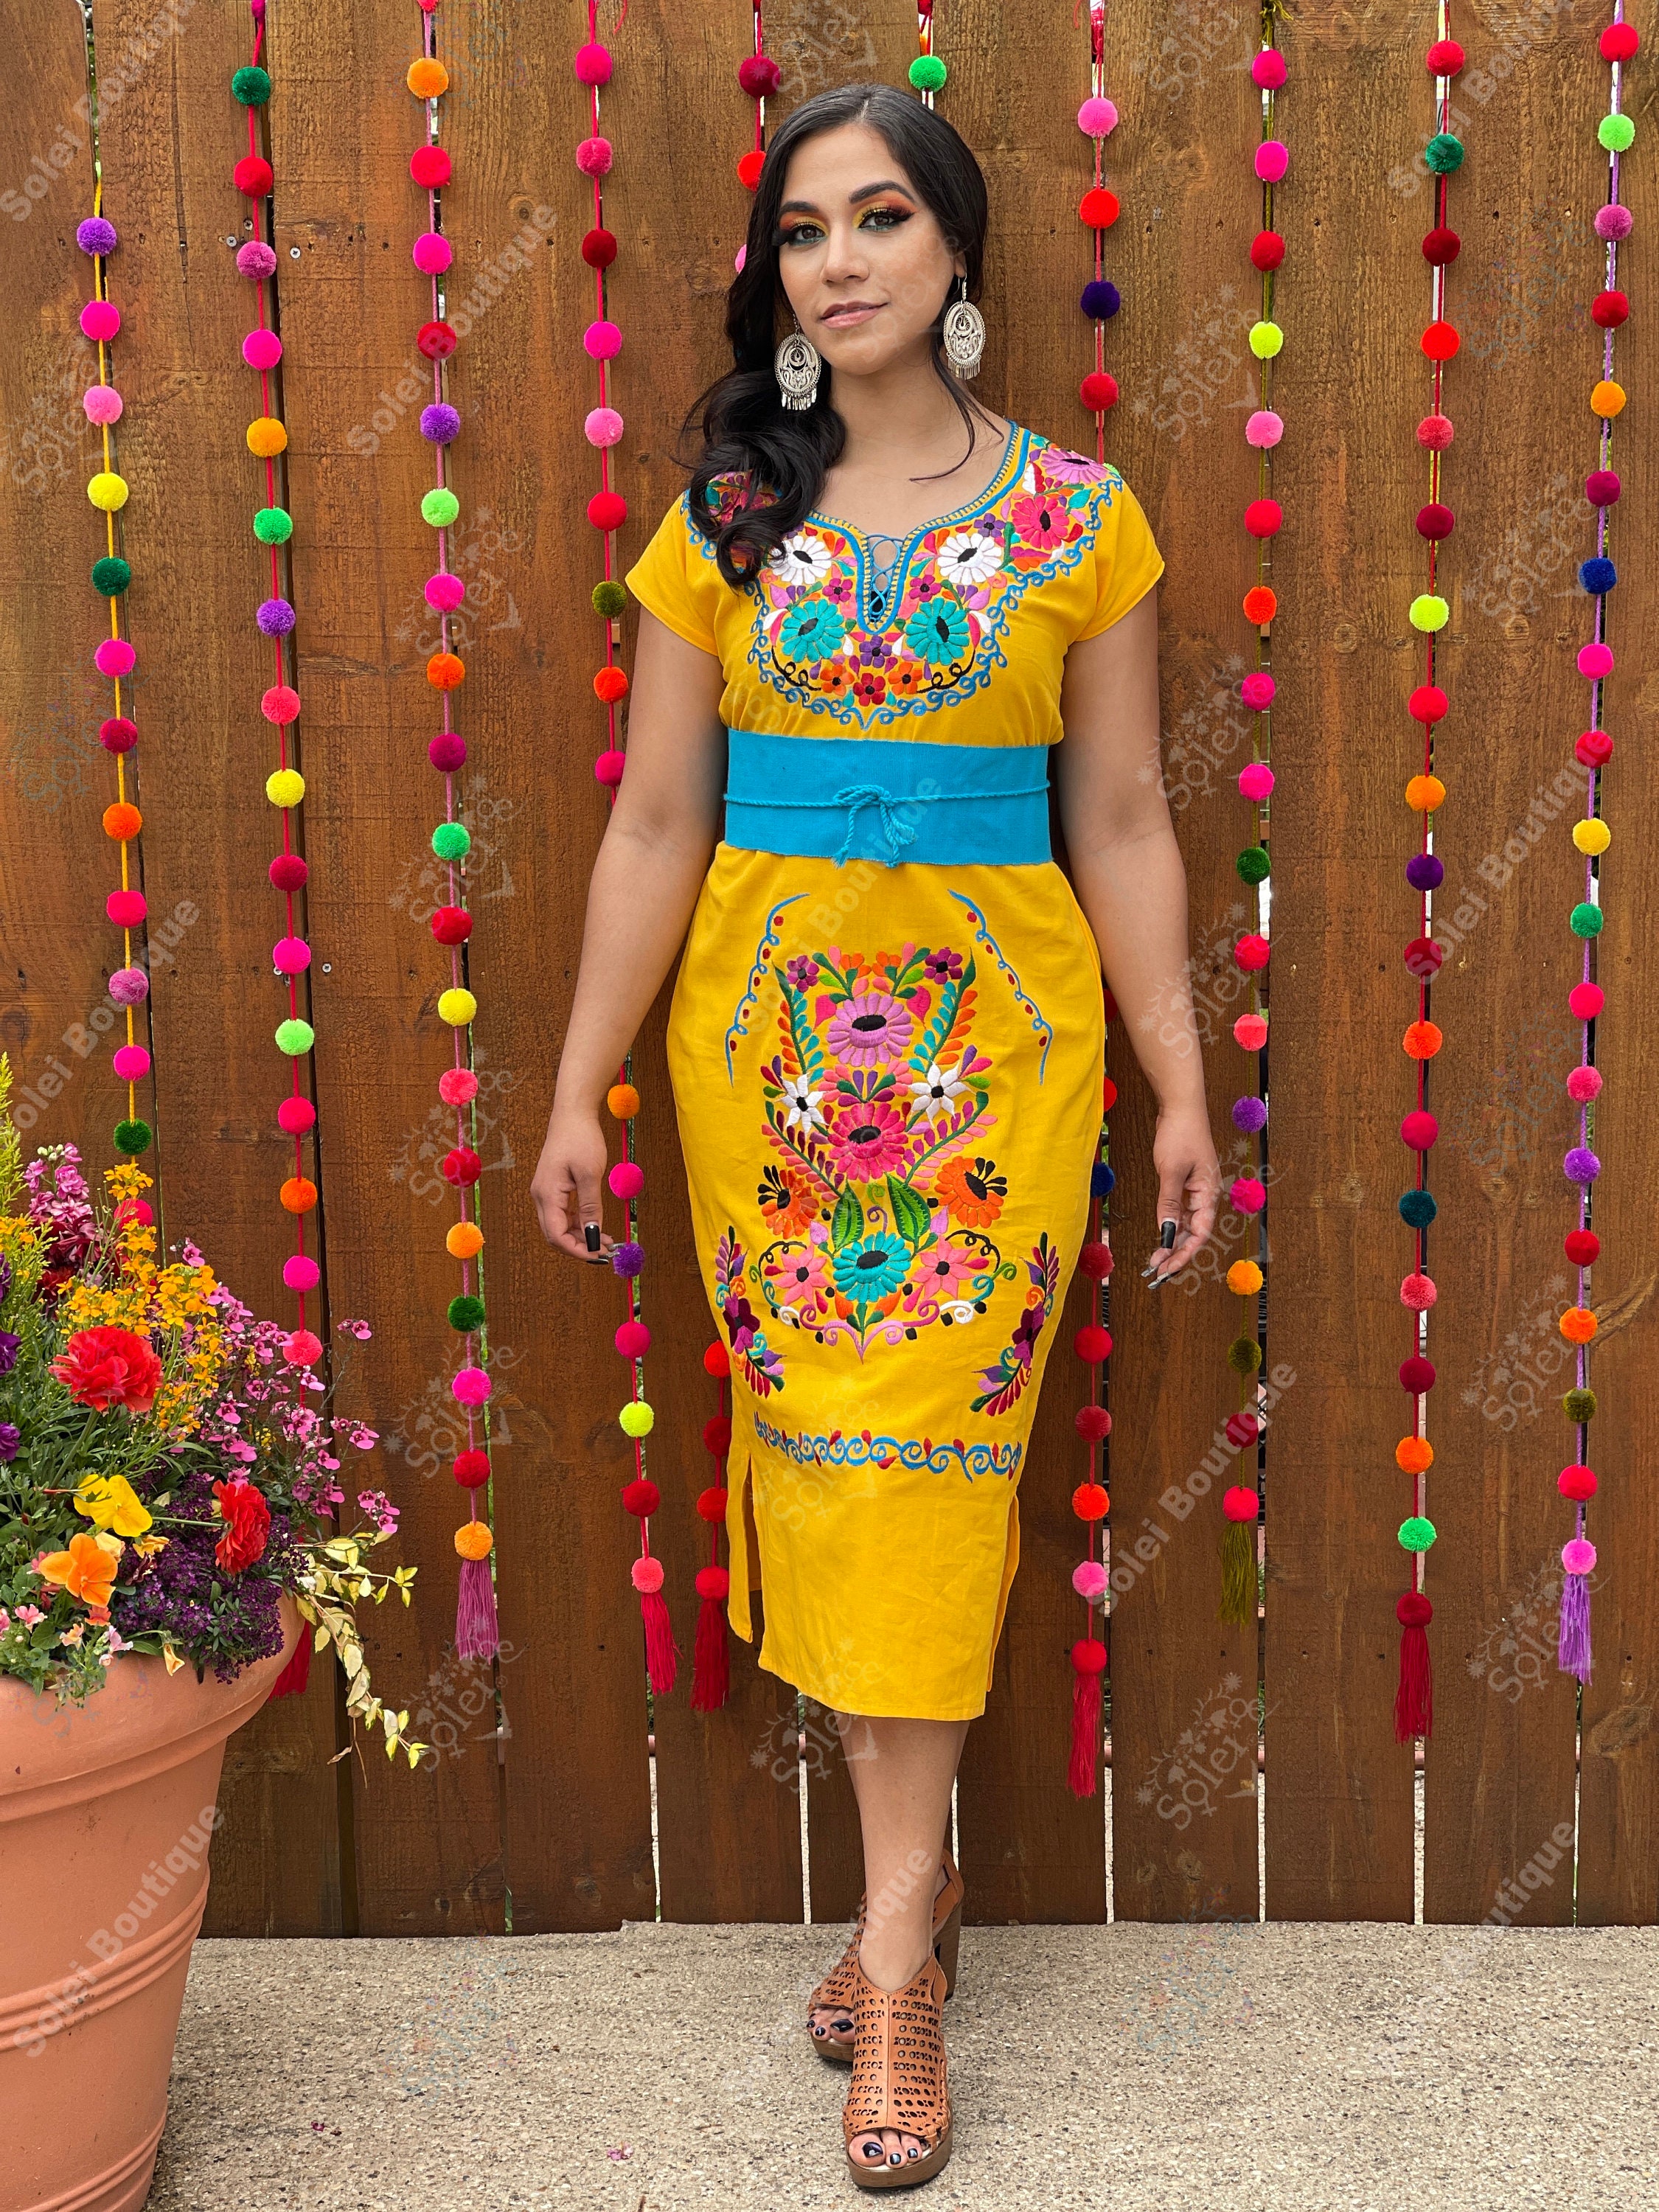 Long Mexican Kimono Dress. Floral Embroidered Dress. Mexican | Etsy